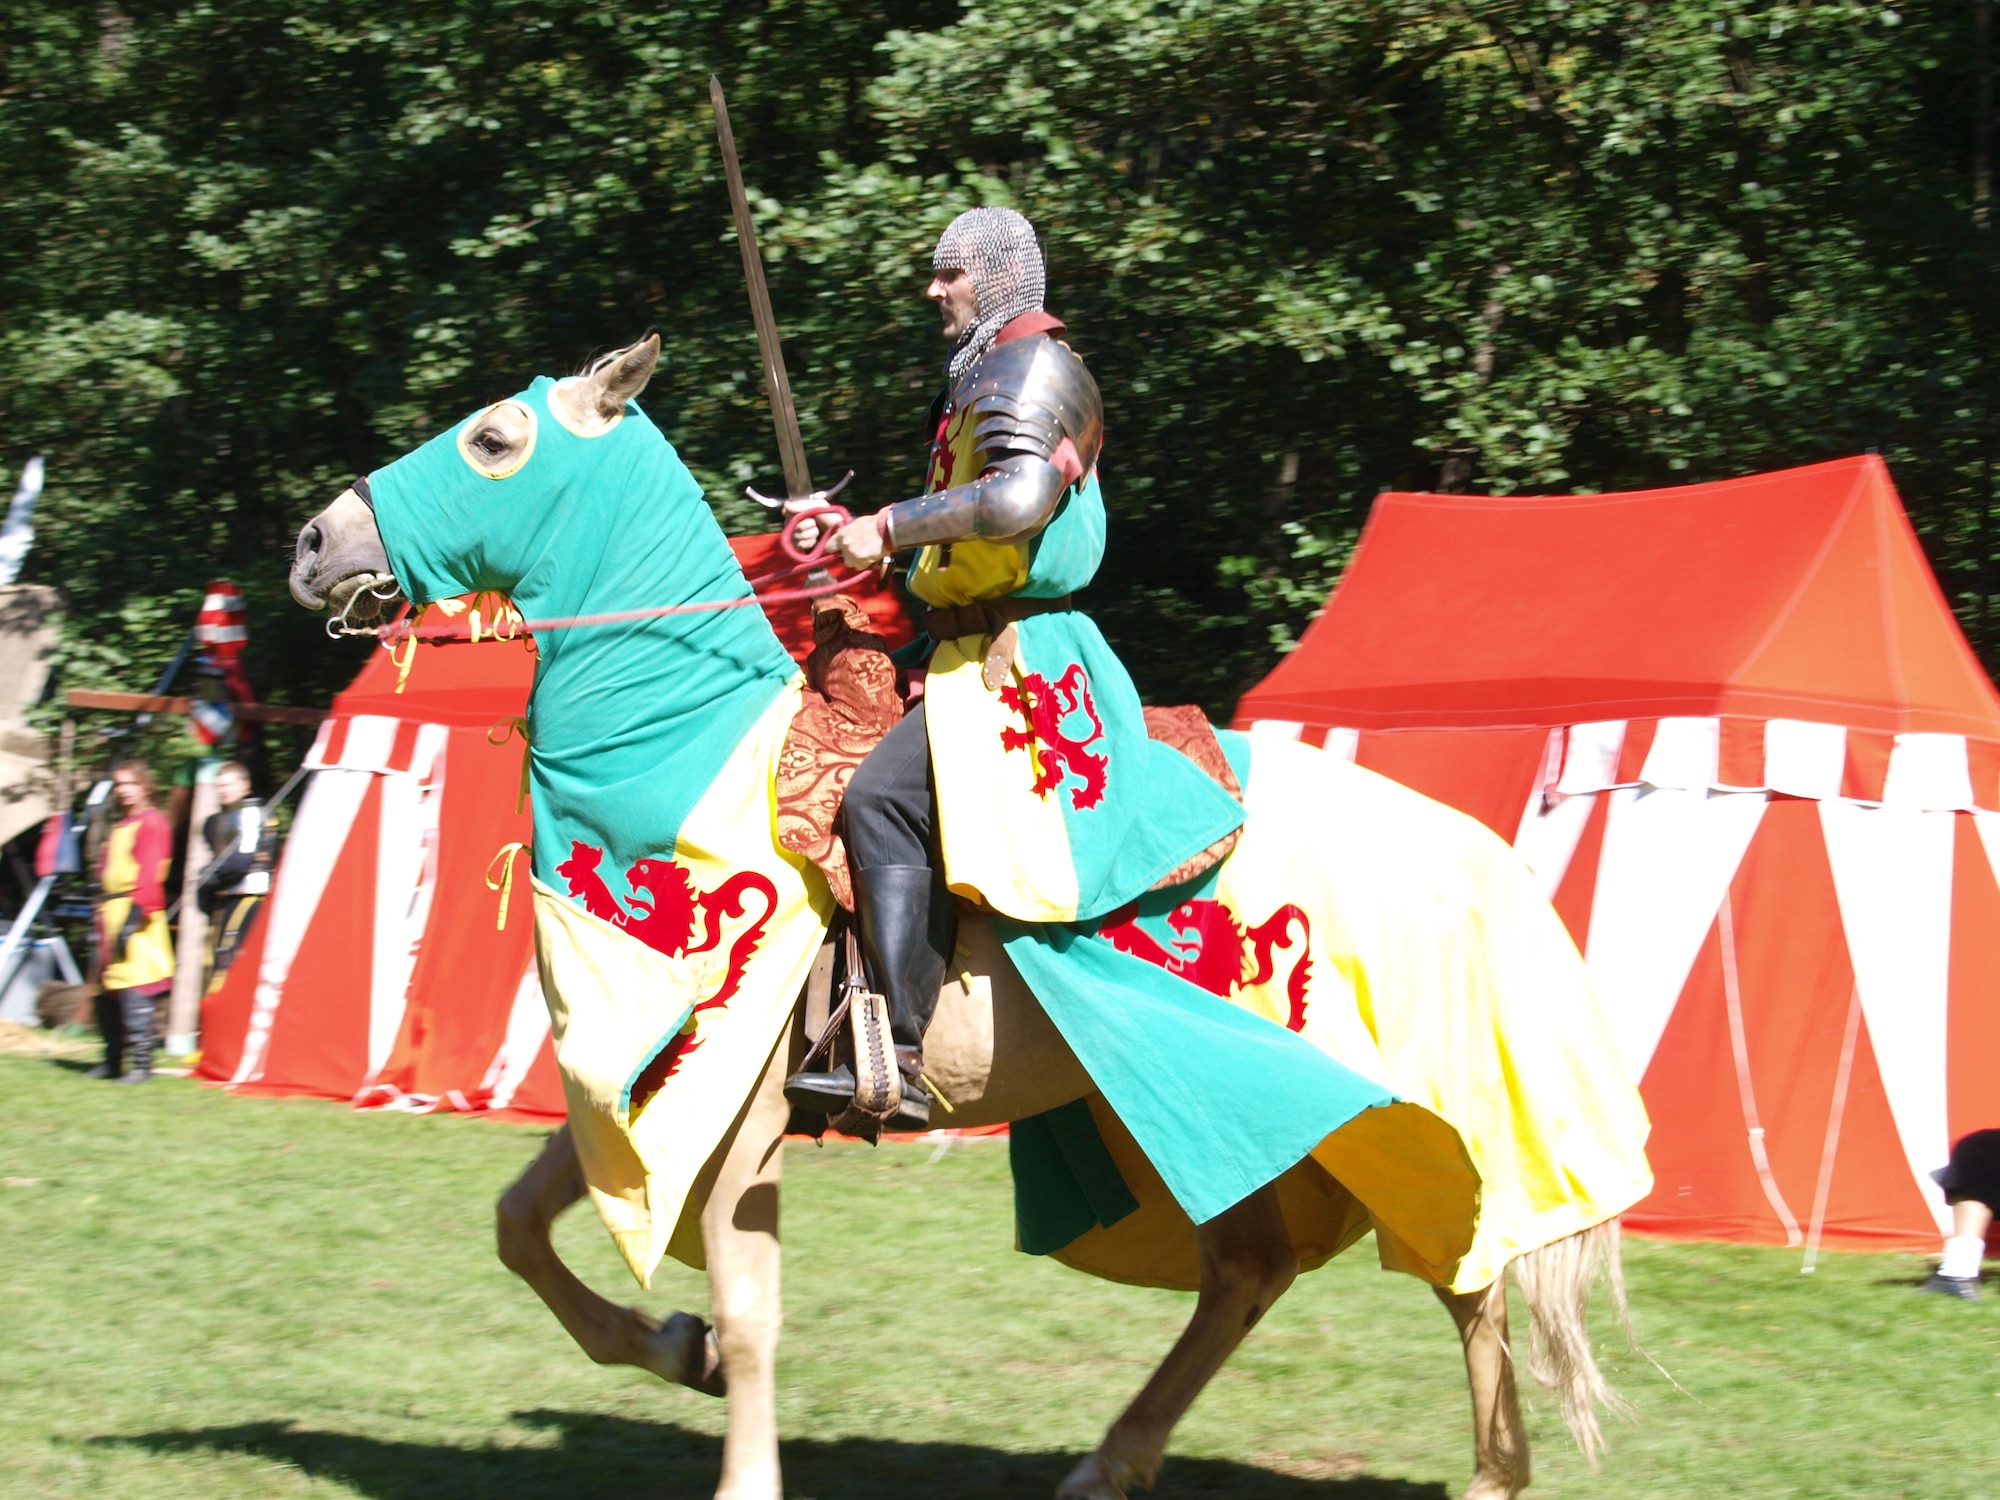 MANDERSCHEID, Germany -- During the annual Manderscheid historical castle festival, knights on their horses will battle with lances, swords, bows and spears. The jousting tournaments are typically the highlight of the annual event. (Courtesy photo)